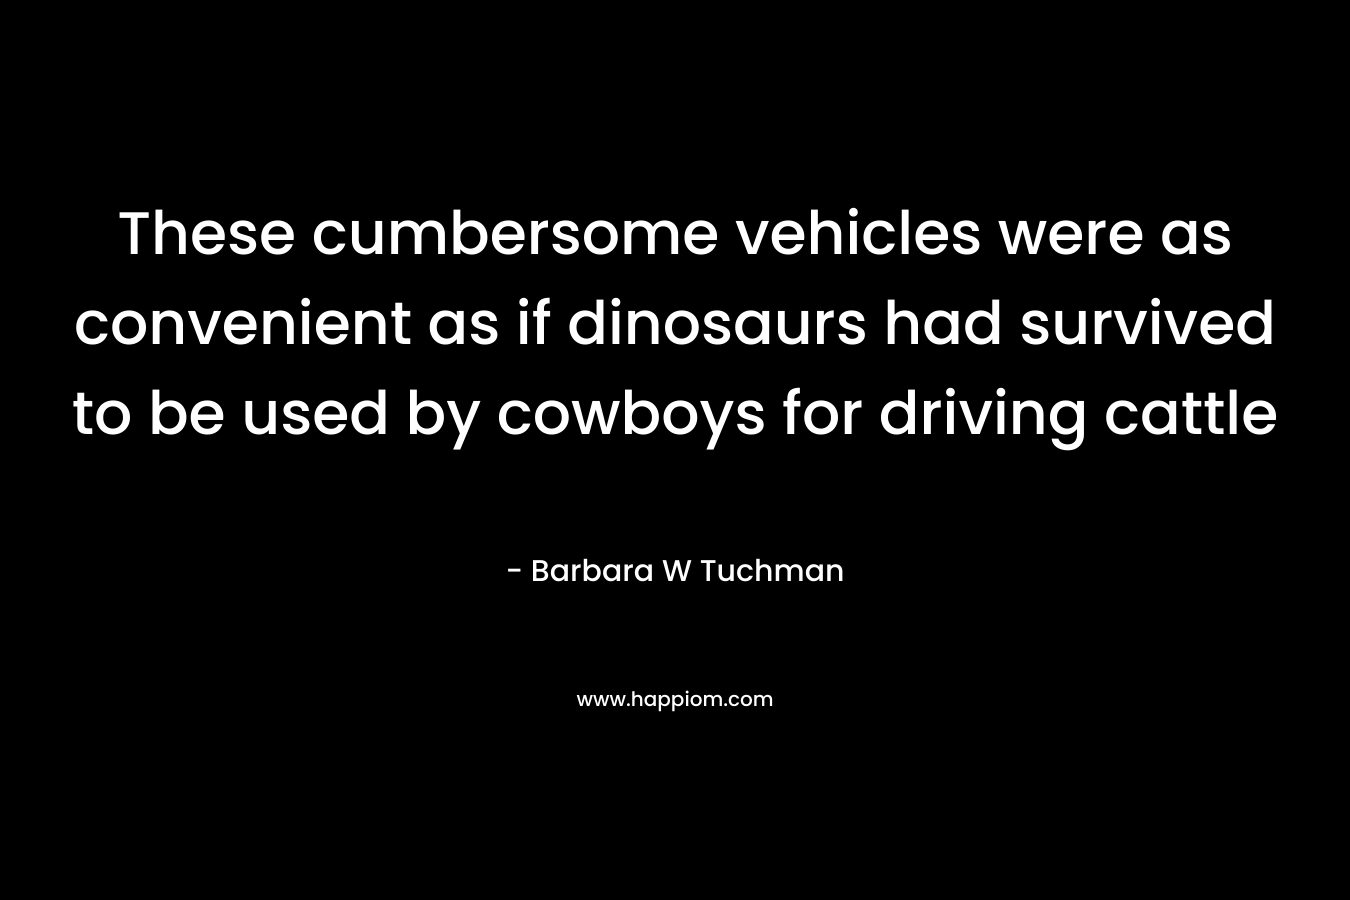 These cumbersome vehicles were as convenient as if dinosaurs had survived to be used by cowboys for driving cattle – Barbara W Tuchman